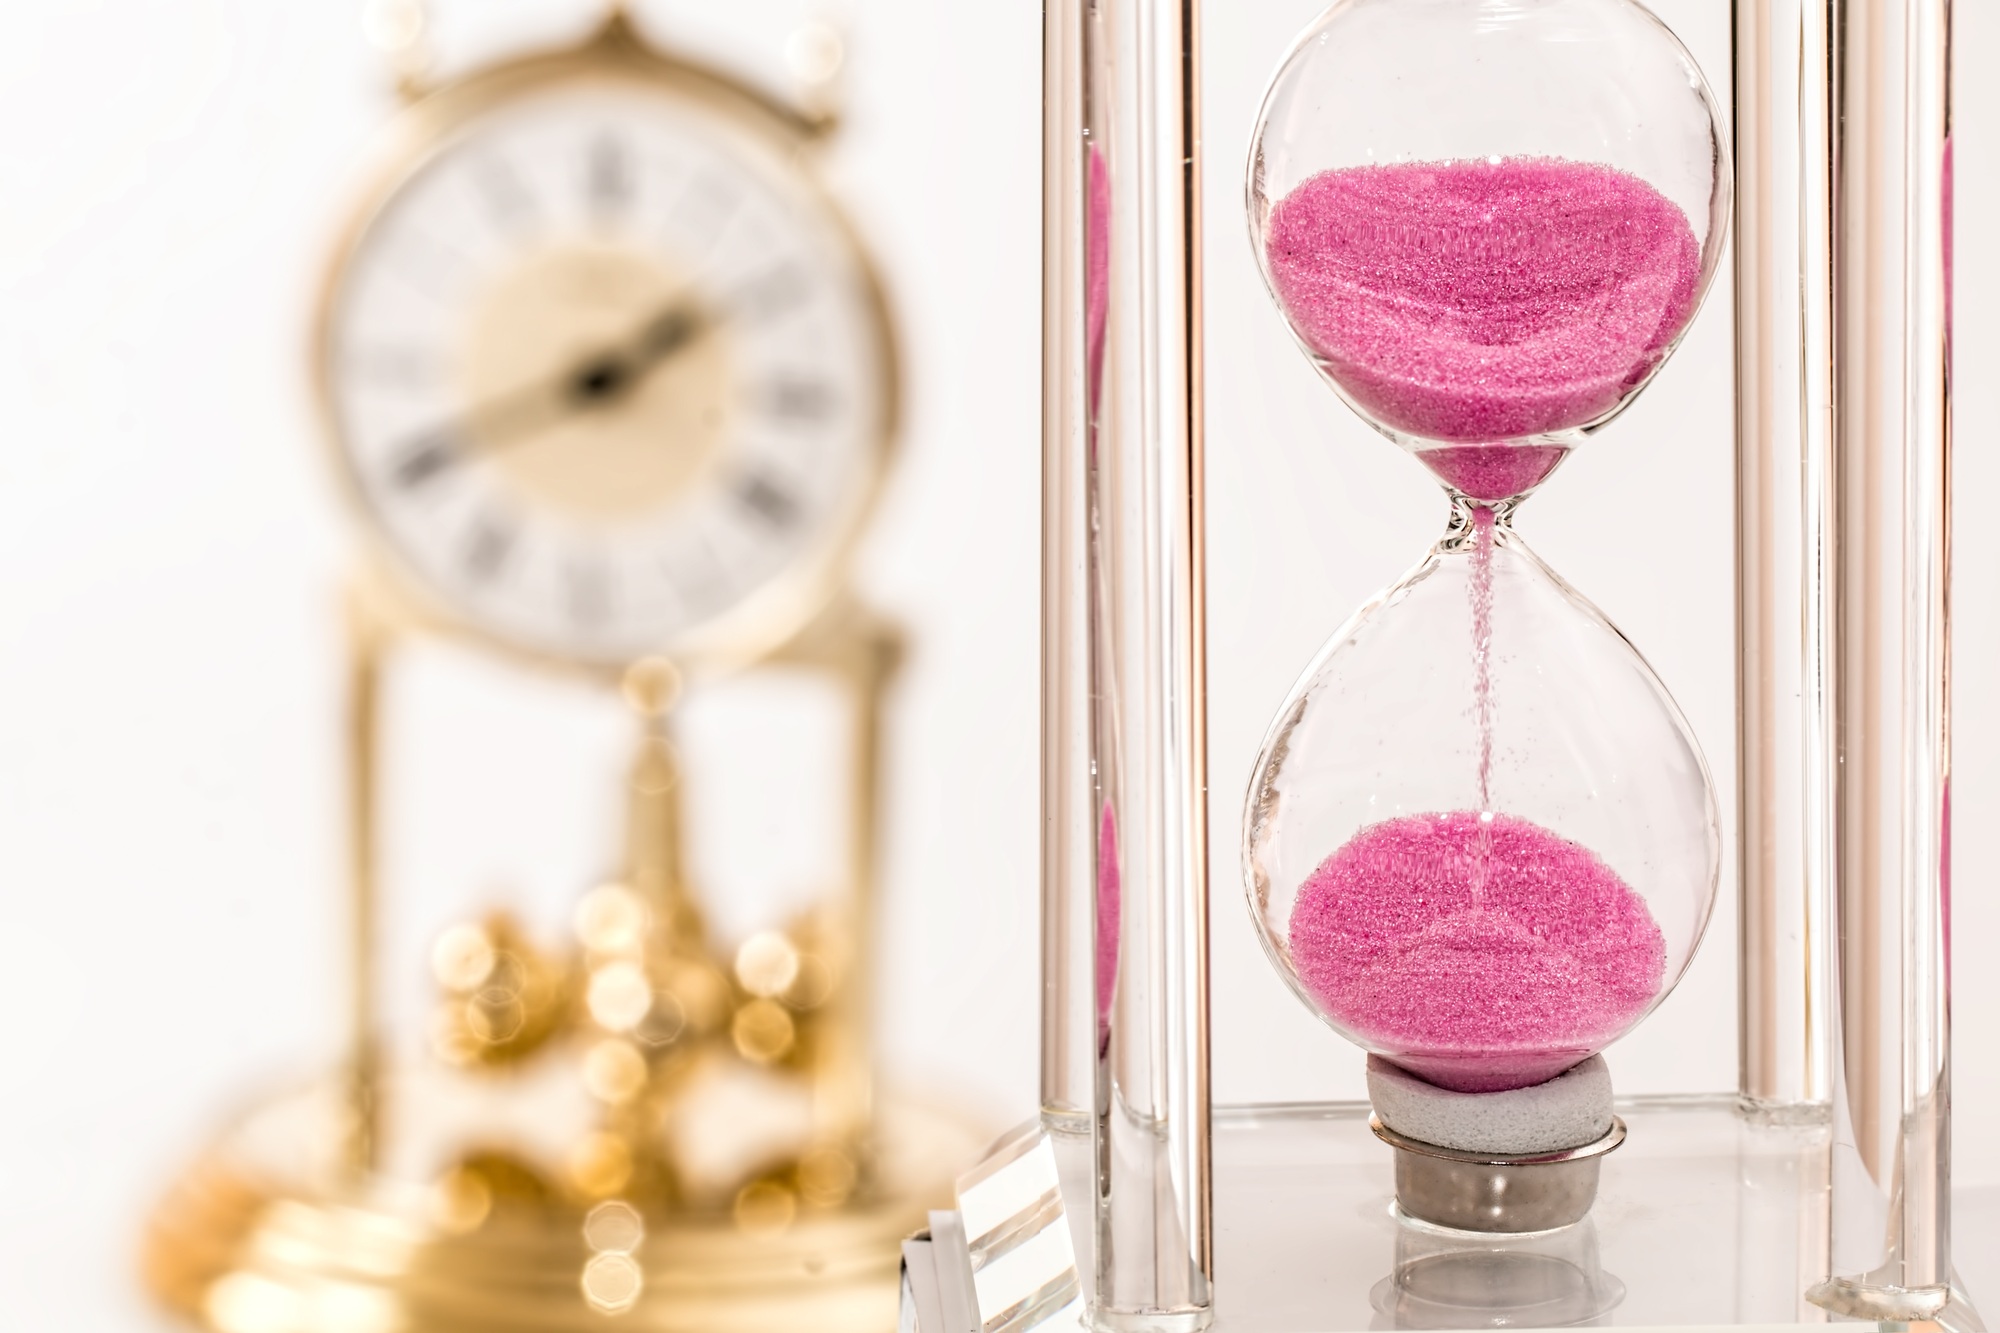 Turn Back Time: 5 Things You Can Do Today for a Healthy, More Youthful Look